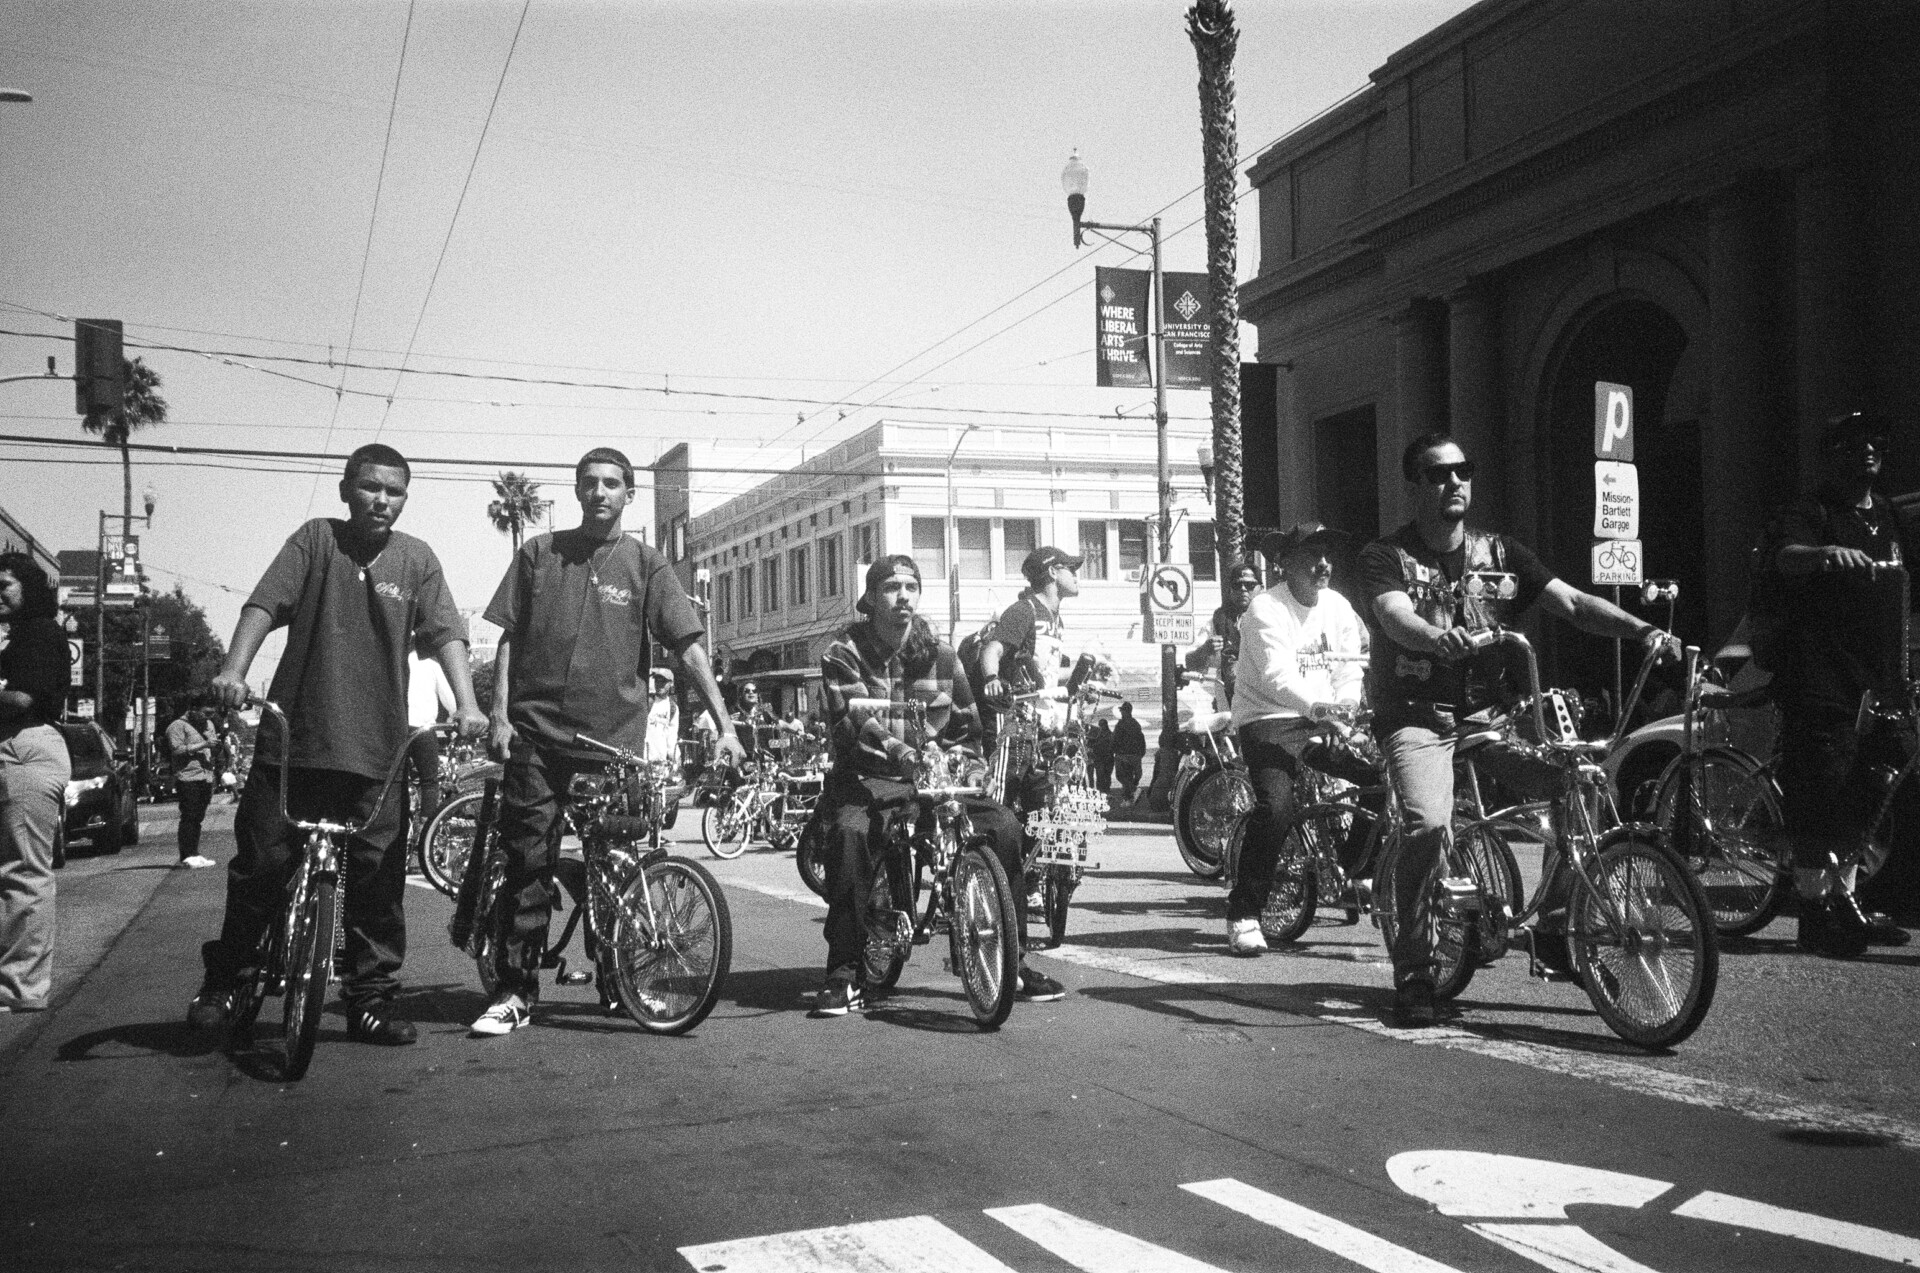 A group of young lowriders on bicycles pose on Mission Street.